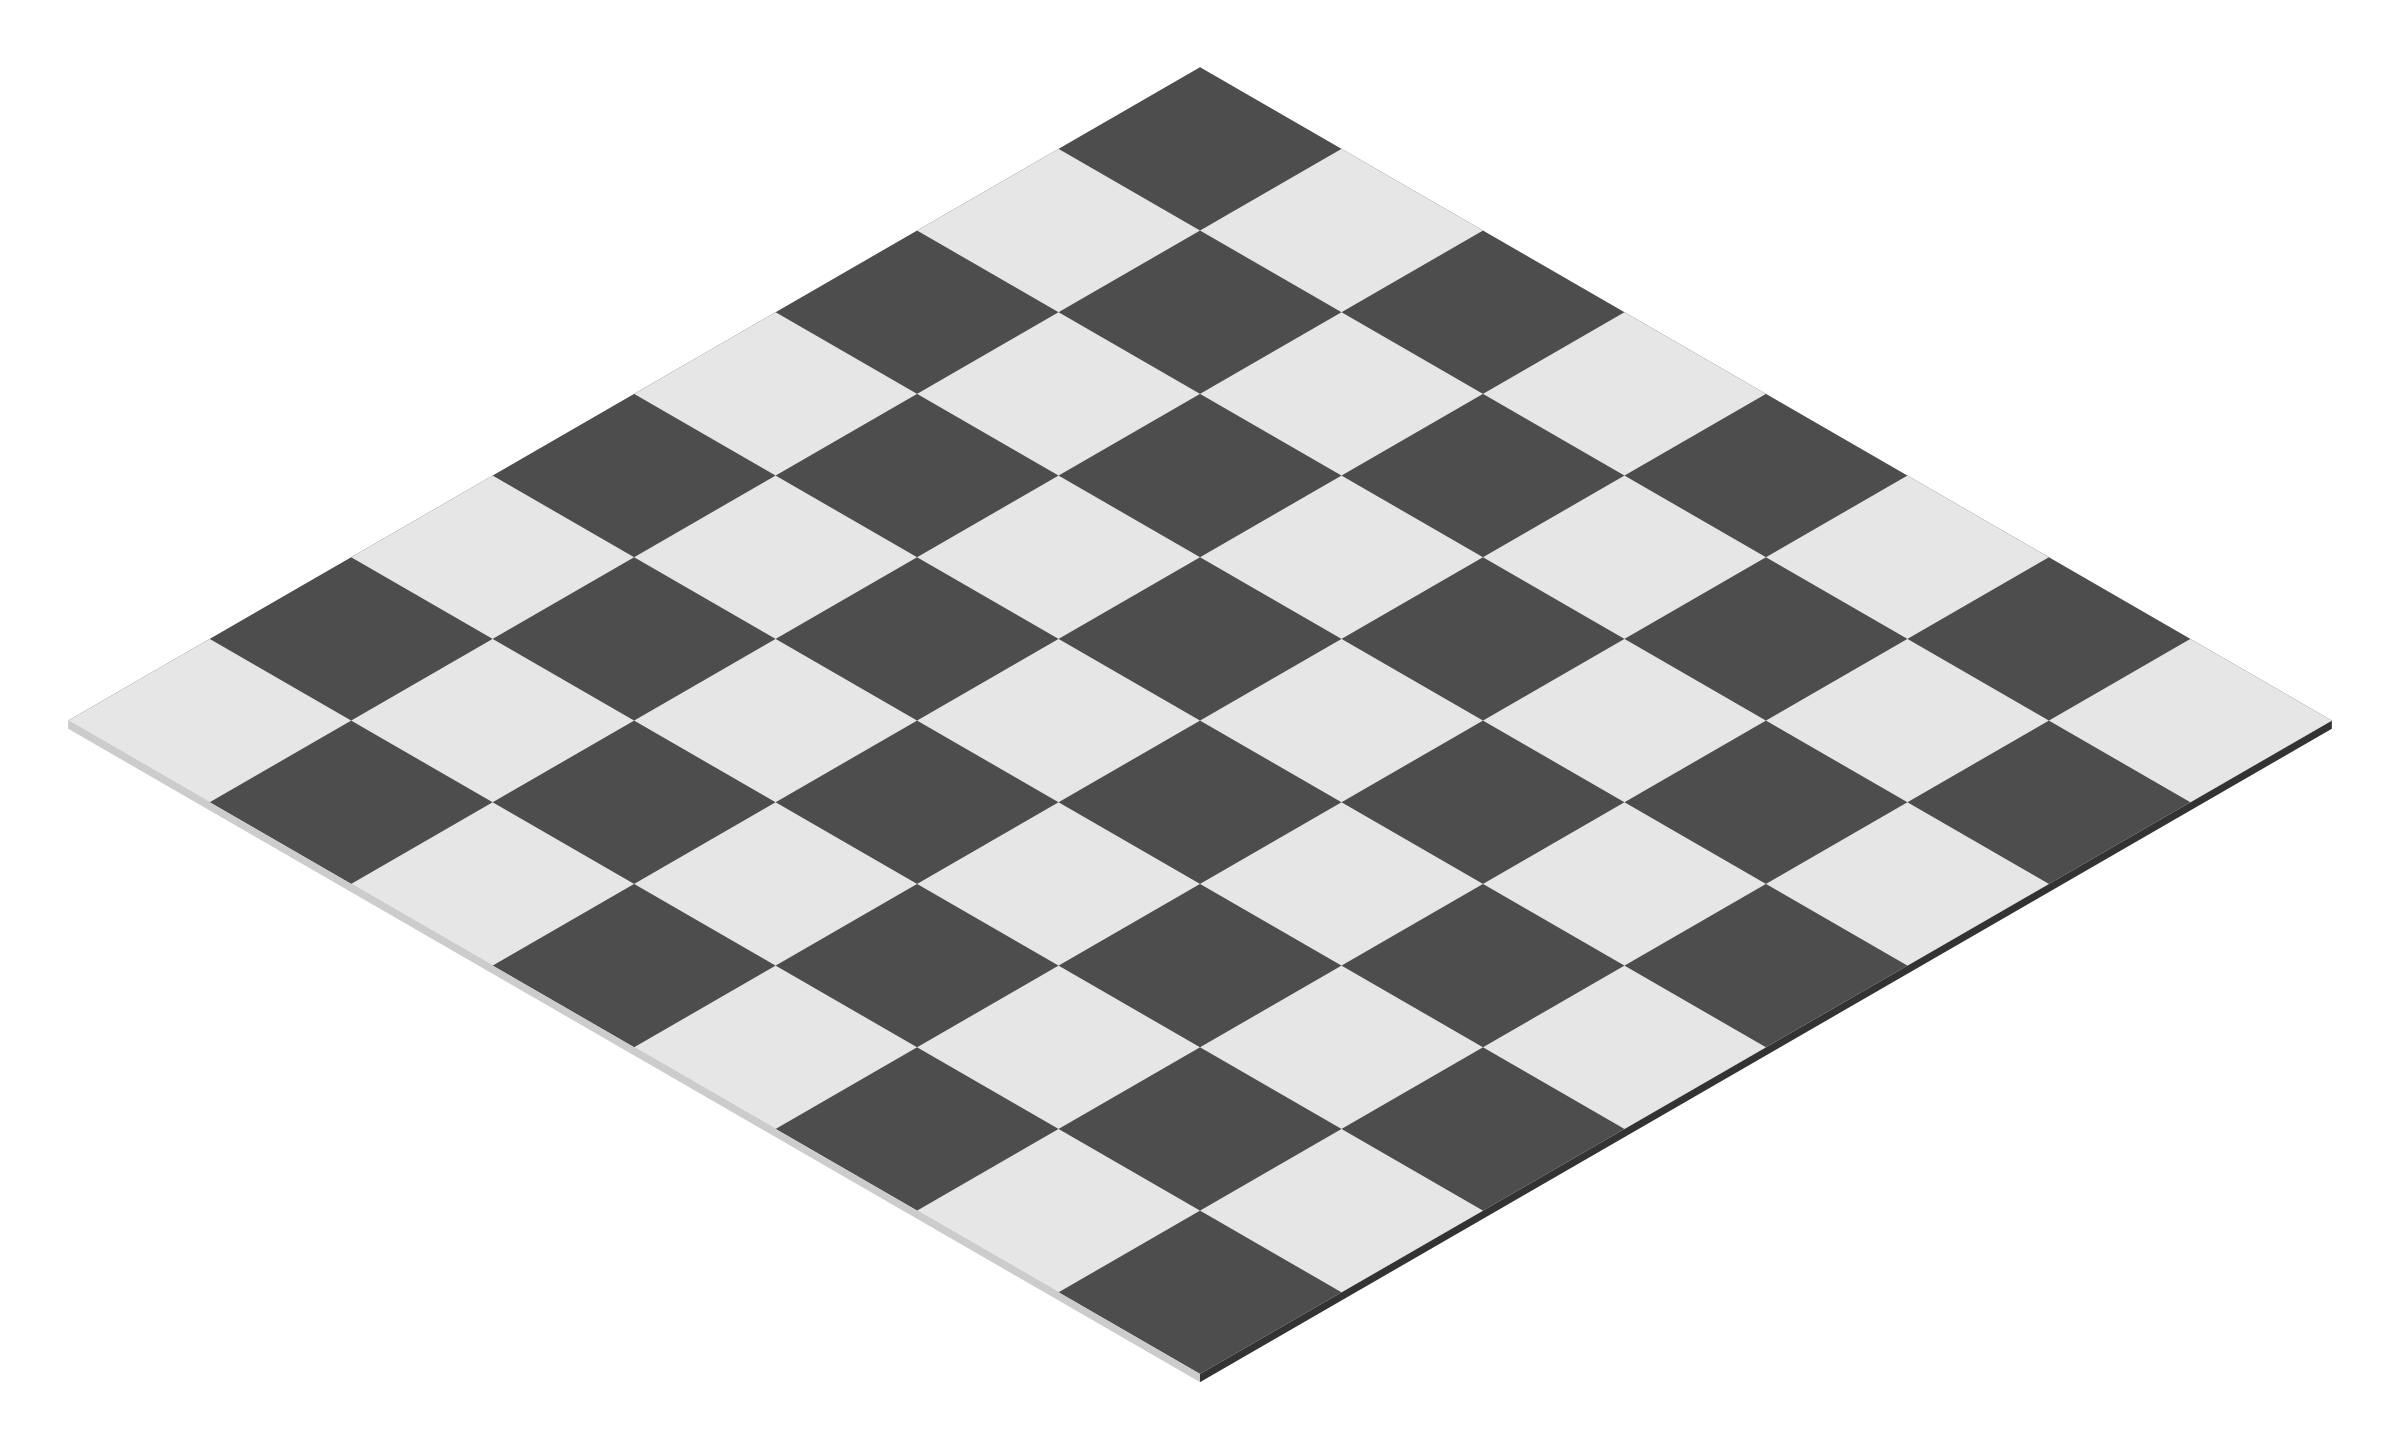 black-and-white-chess-board-vector-file-image-free-stock-photo